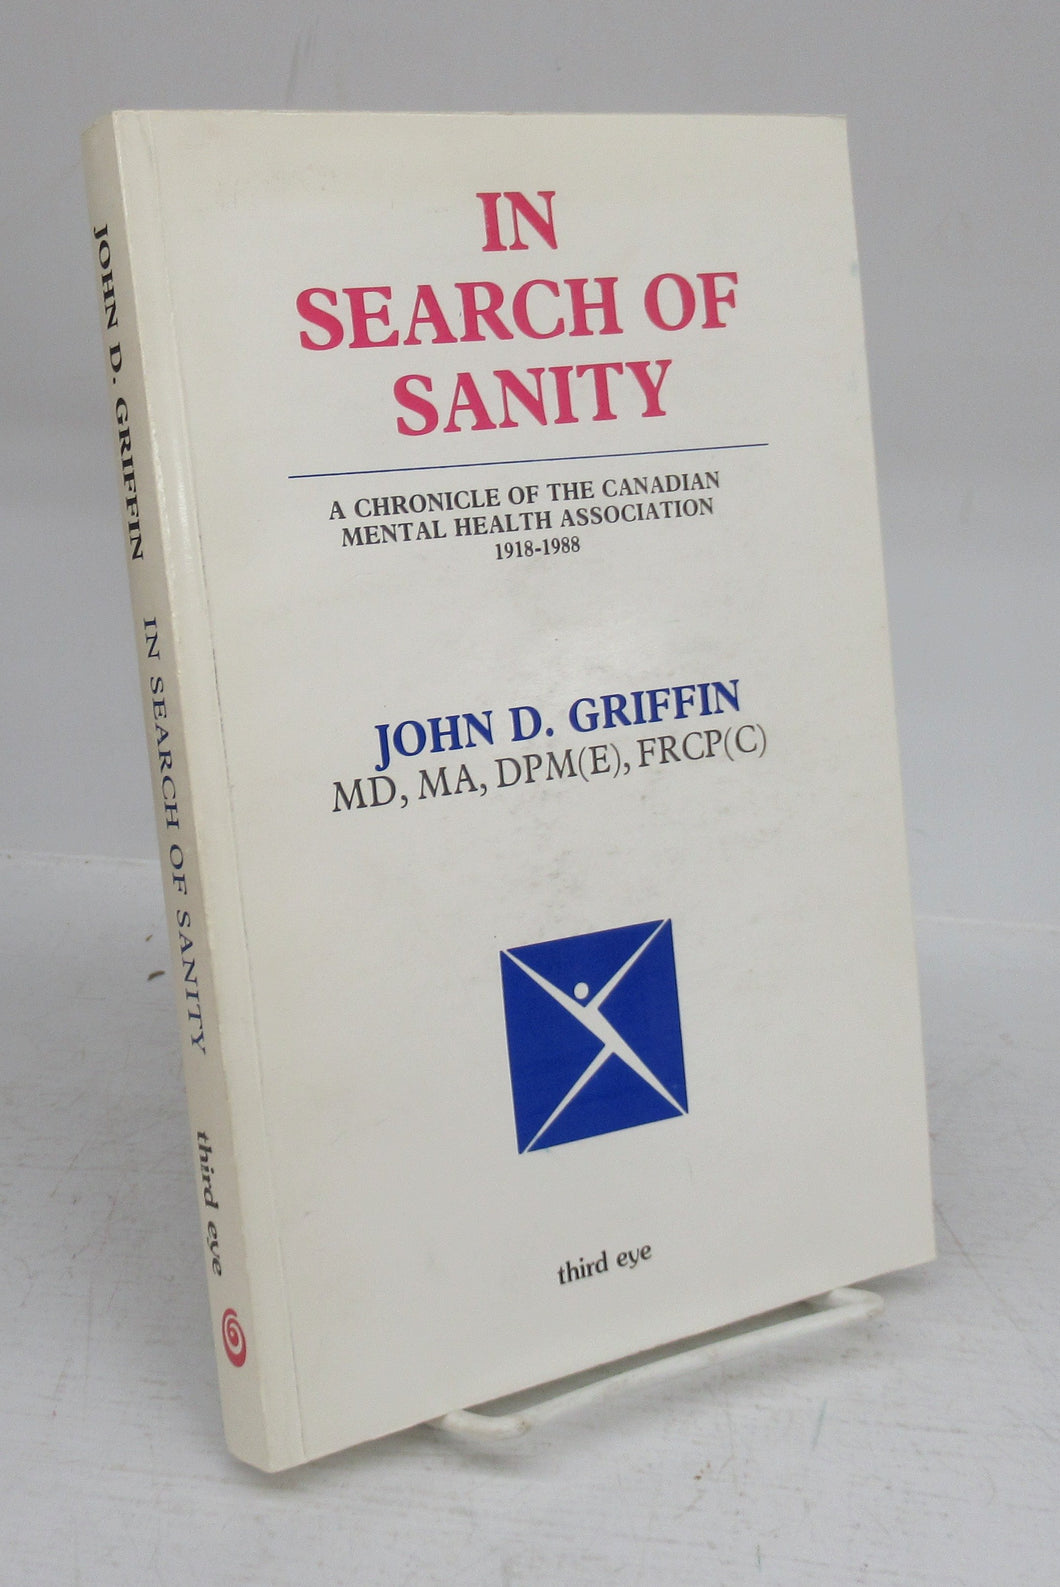 In Search of Sanity: A Chronicle of the Canadian Mental Health Association 1918-1988